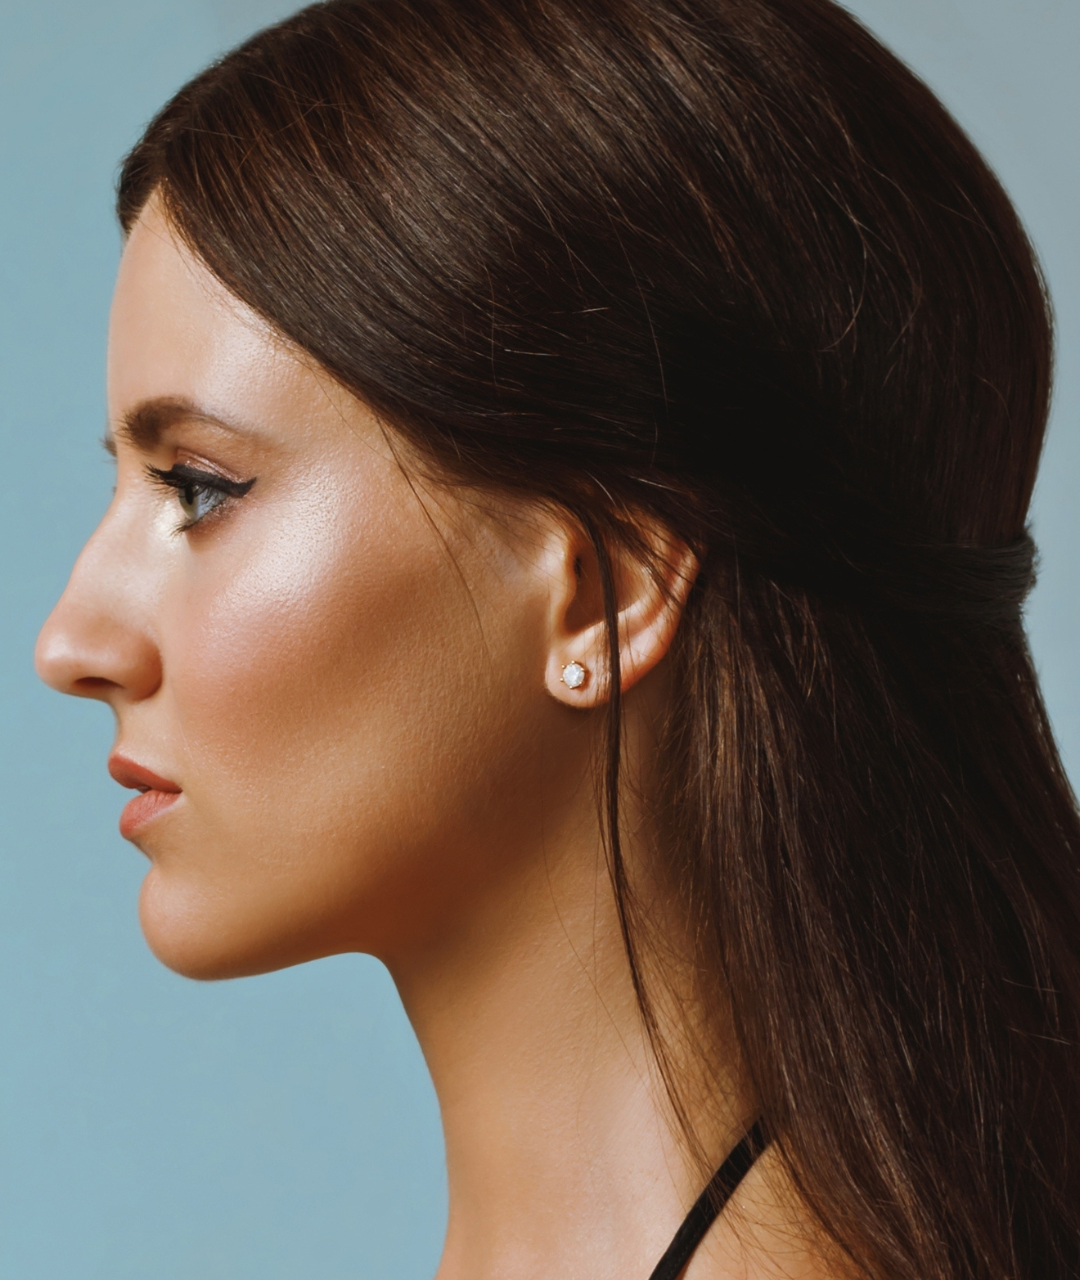 Left Profile View of a 20-something brunette woman